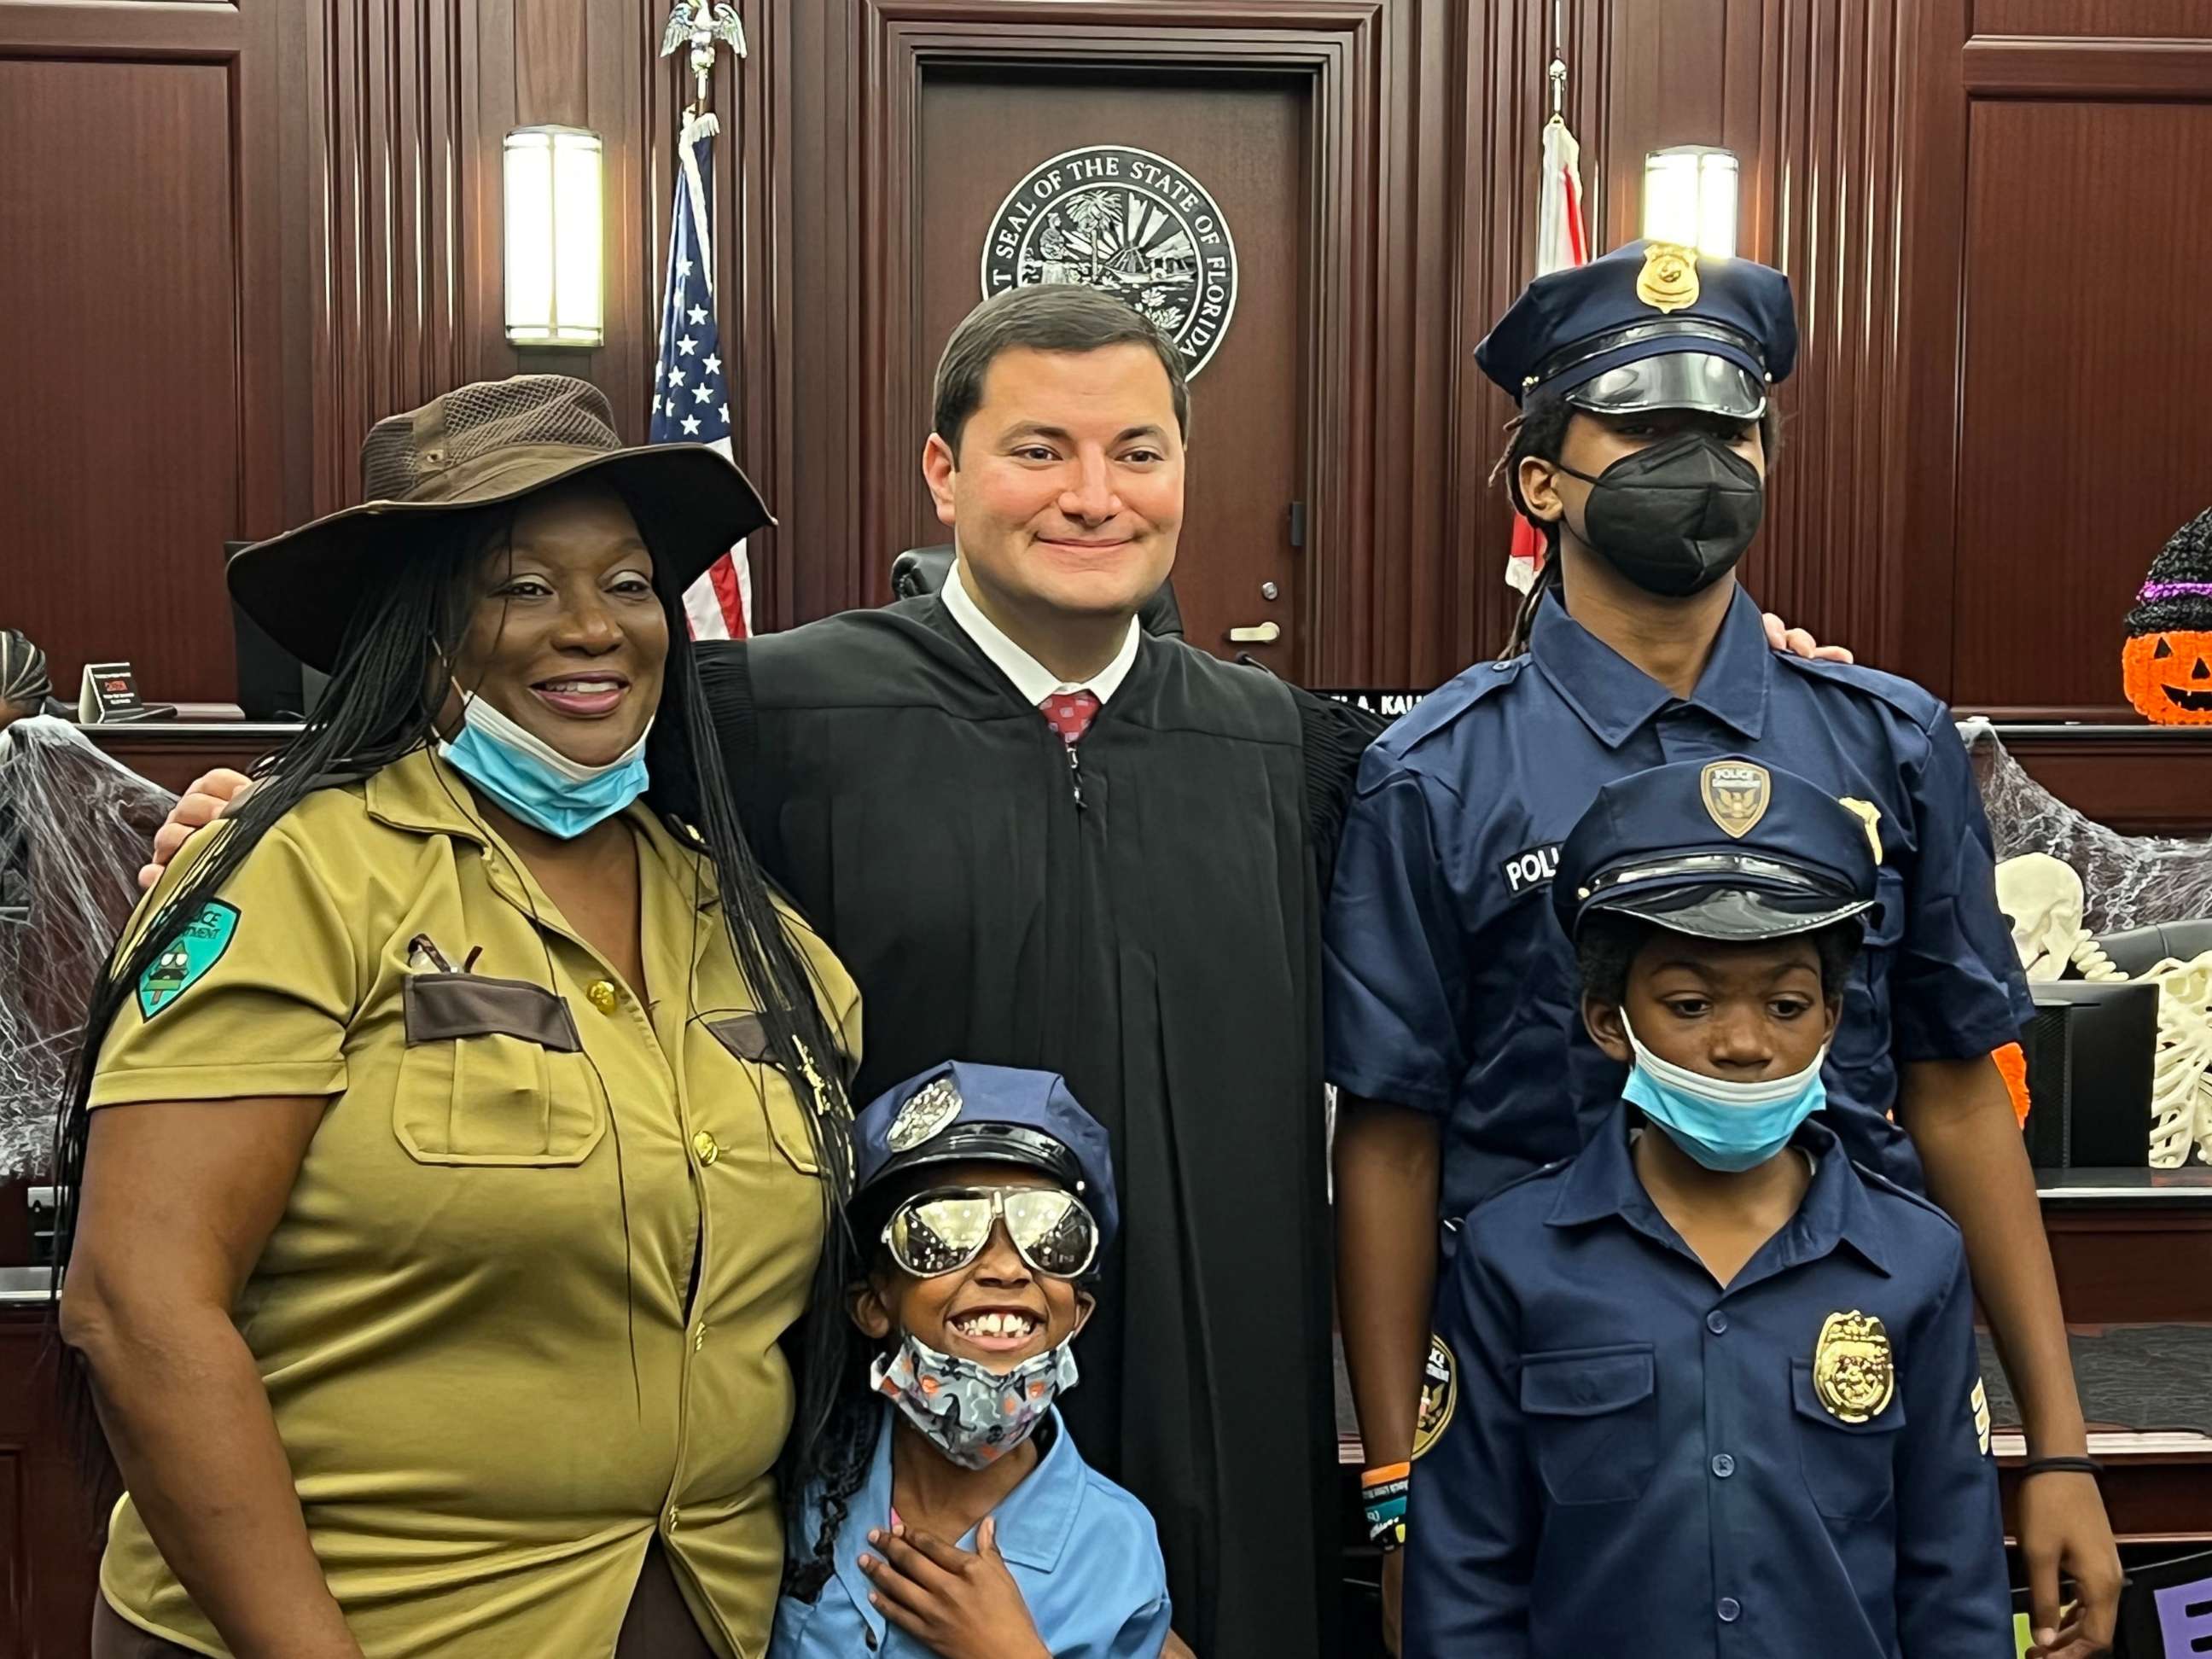 PHOTO: Shyla Sheppard poses with her adopted family and Judge Michael Kalil at the courthouse in Duval County, Florida, on Oct. 29, 2021